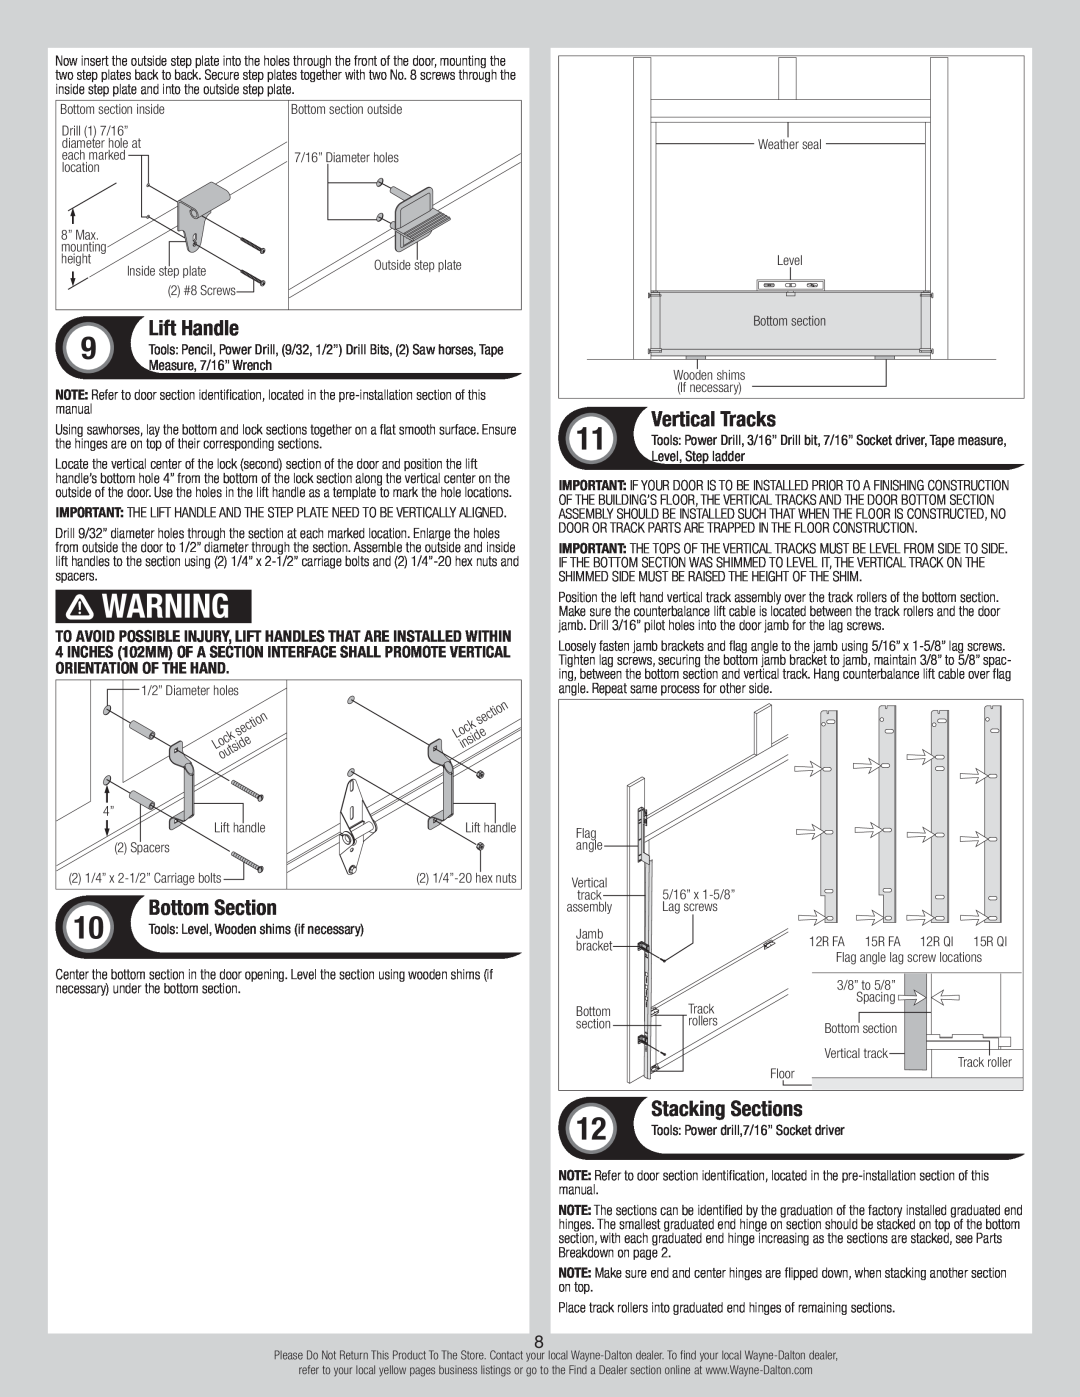 Wayne-Dalton 8700 installation instructions Lift Handle, Vertical Tracks, Bottom Section, Stacking Sections 